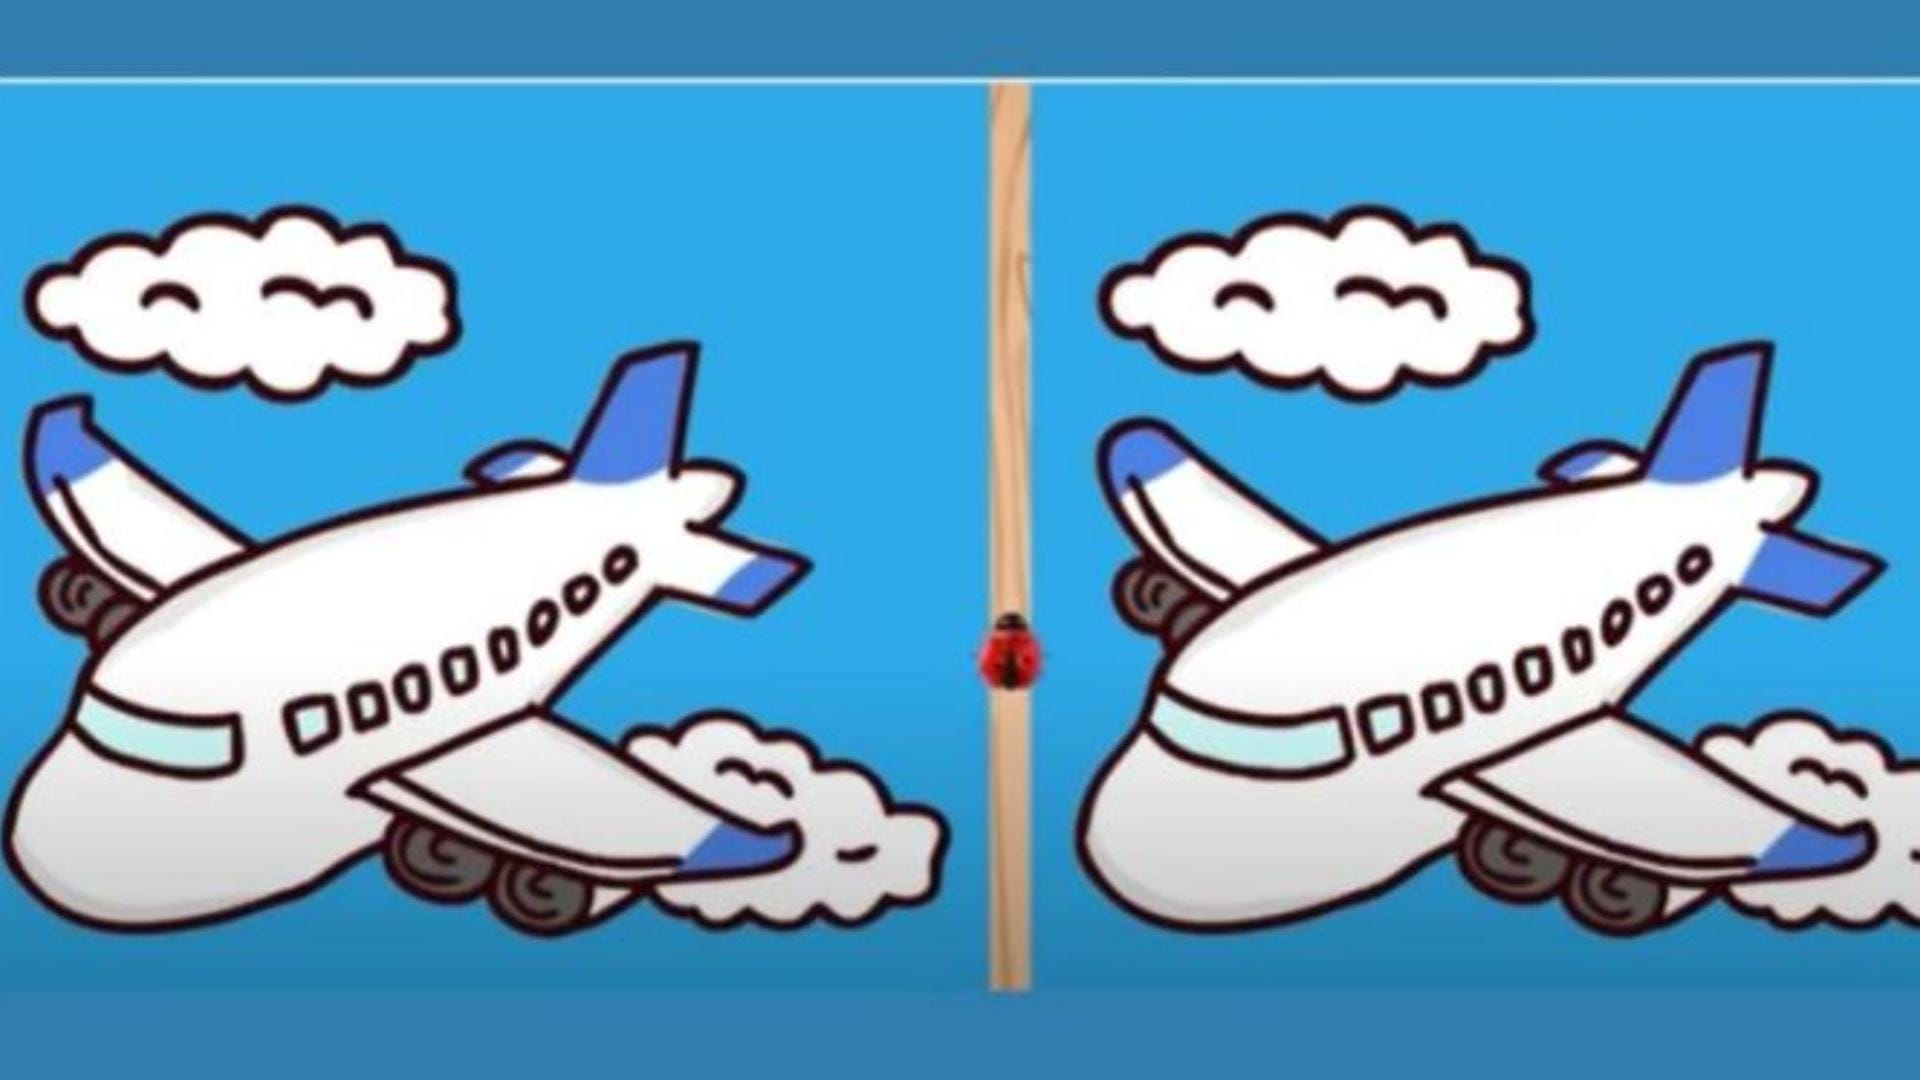 You've got the eyes of a hawk if you can spot three differences in these cartoon airplanes in just ten seconds.